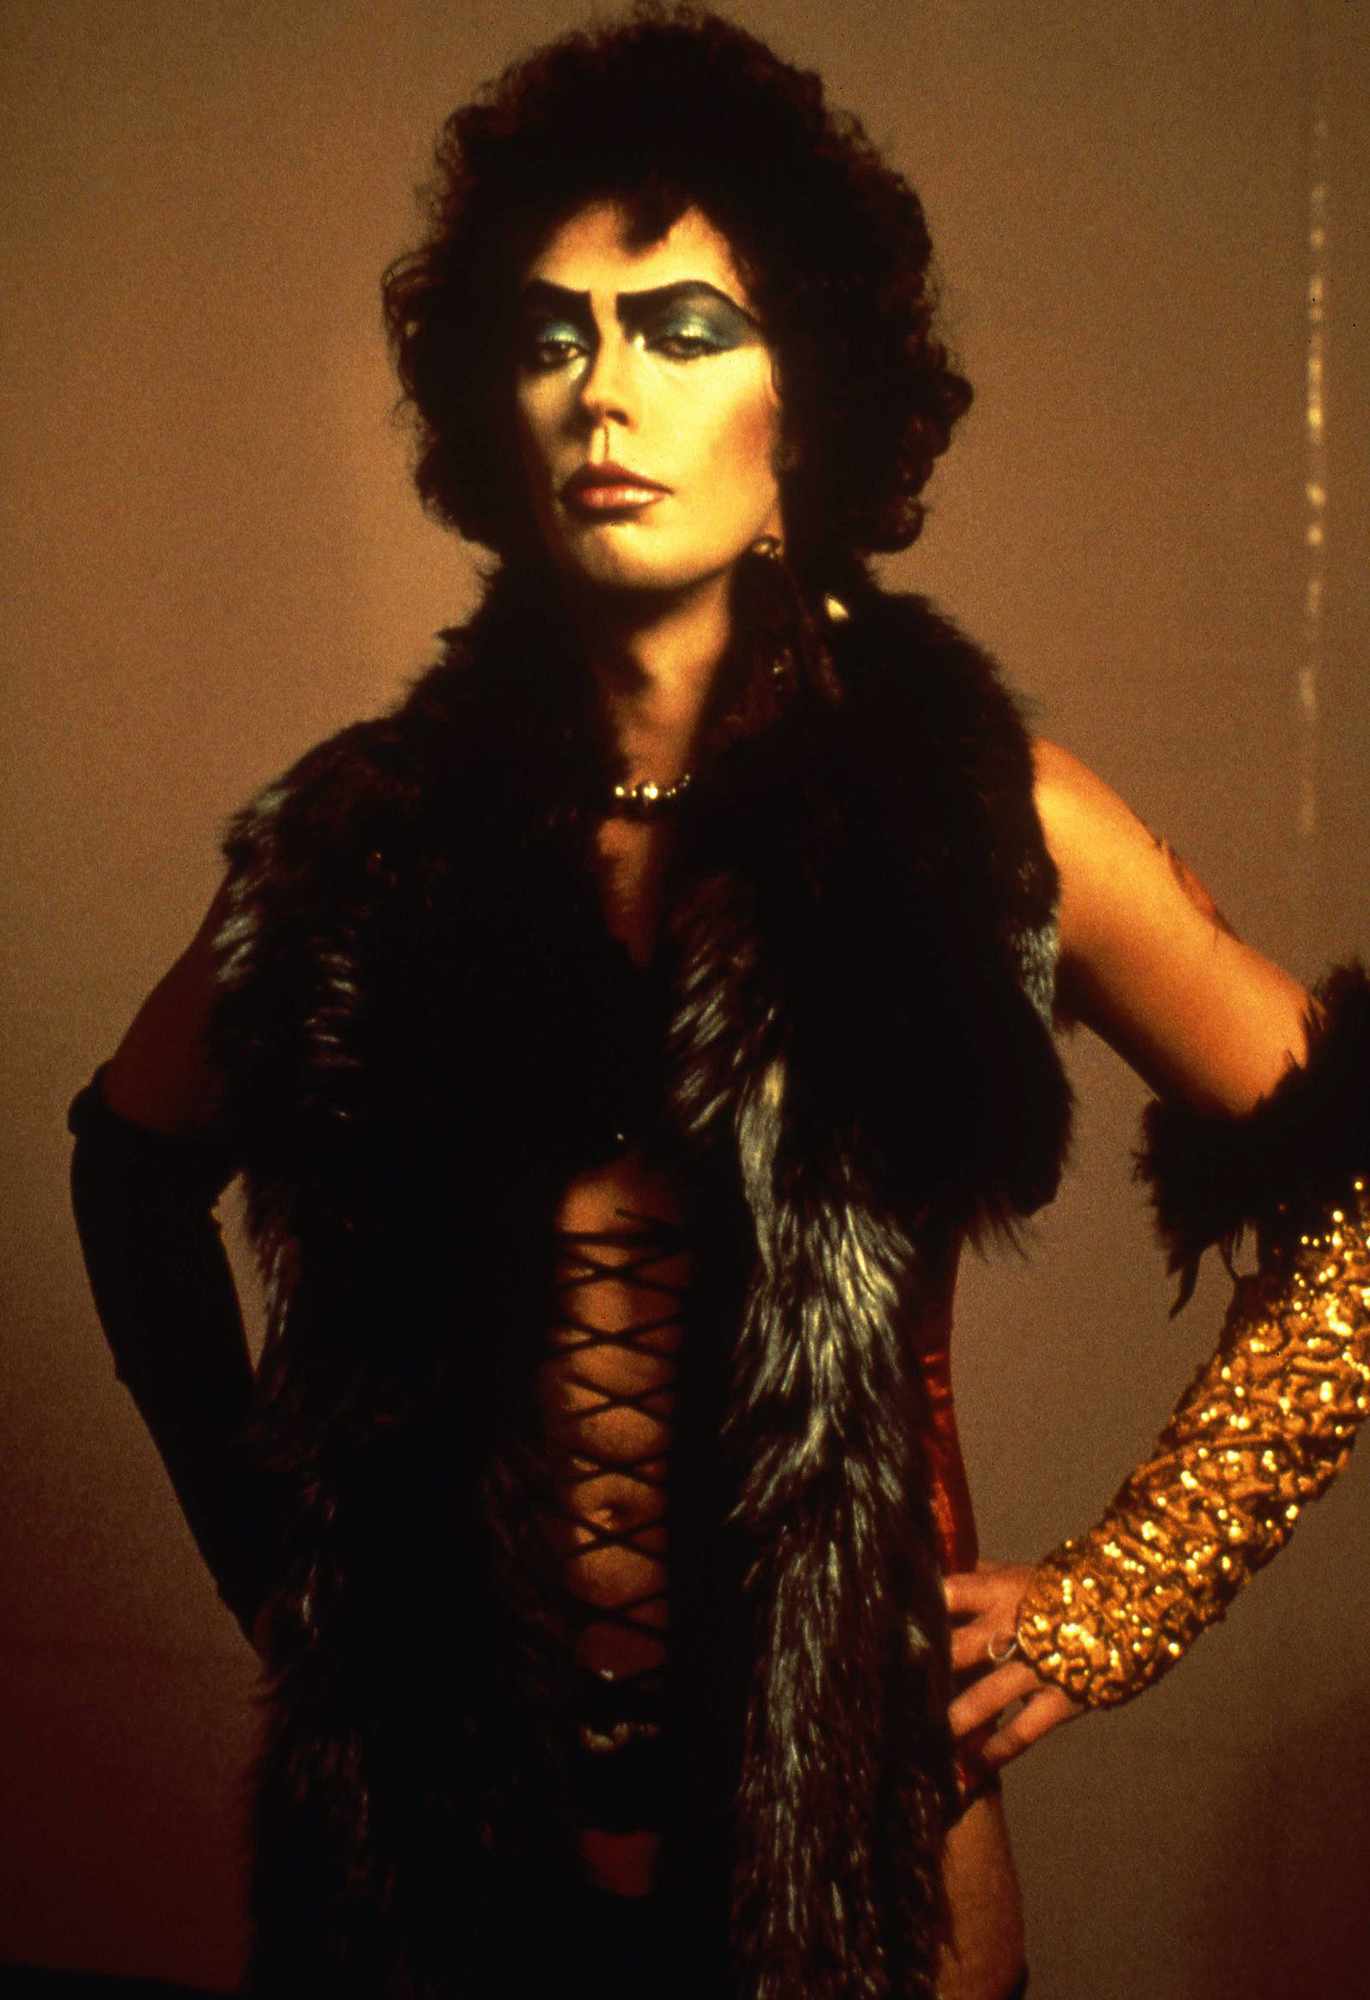 THE ROCKY HORROR PICTURE SHOW, Tim Curry, 1975. TM & Copyright &copy;20th Century Fox. All rights reserve